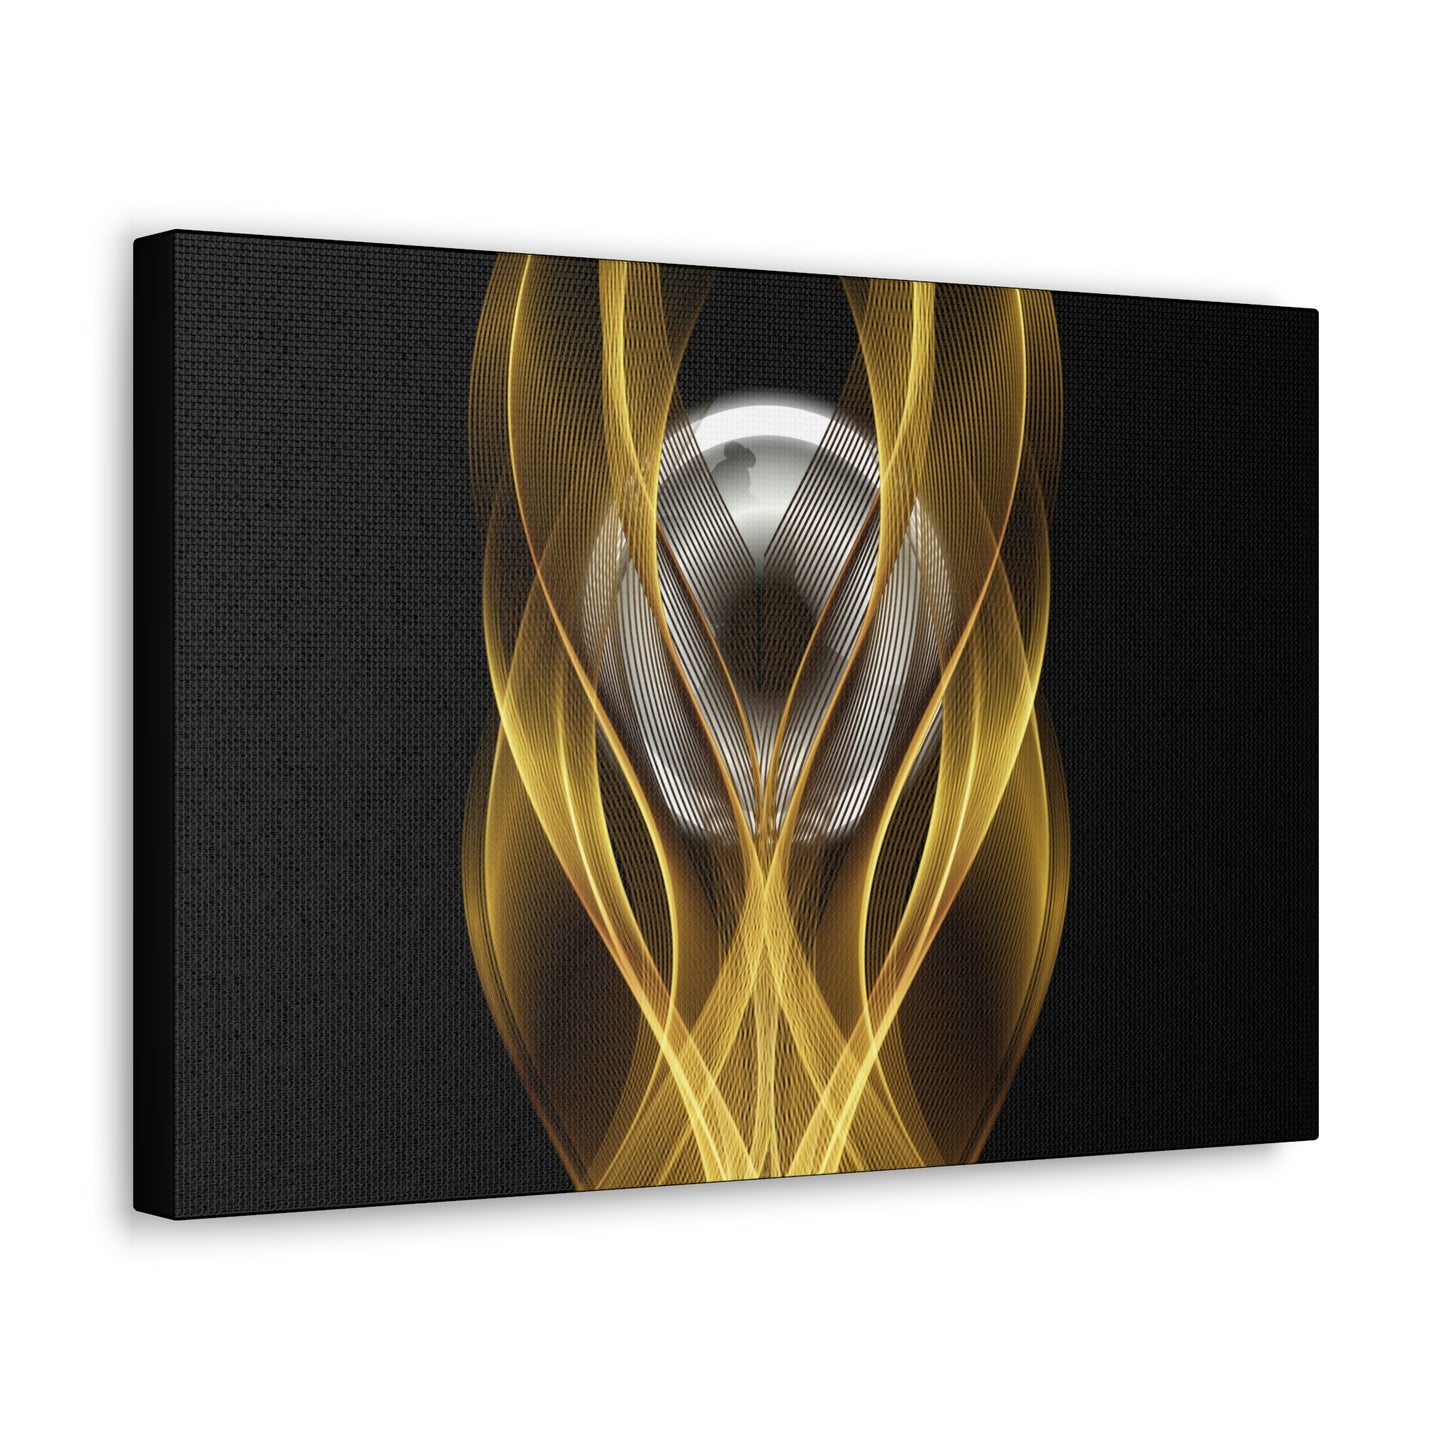 Home Decor Custom Wall ART | Canvas Frame Gold and Black Print | Painting Poster | Abstract Design | Modern Home Office Wall Frame | Firelin